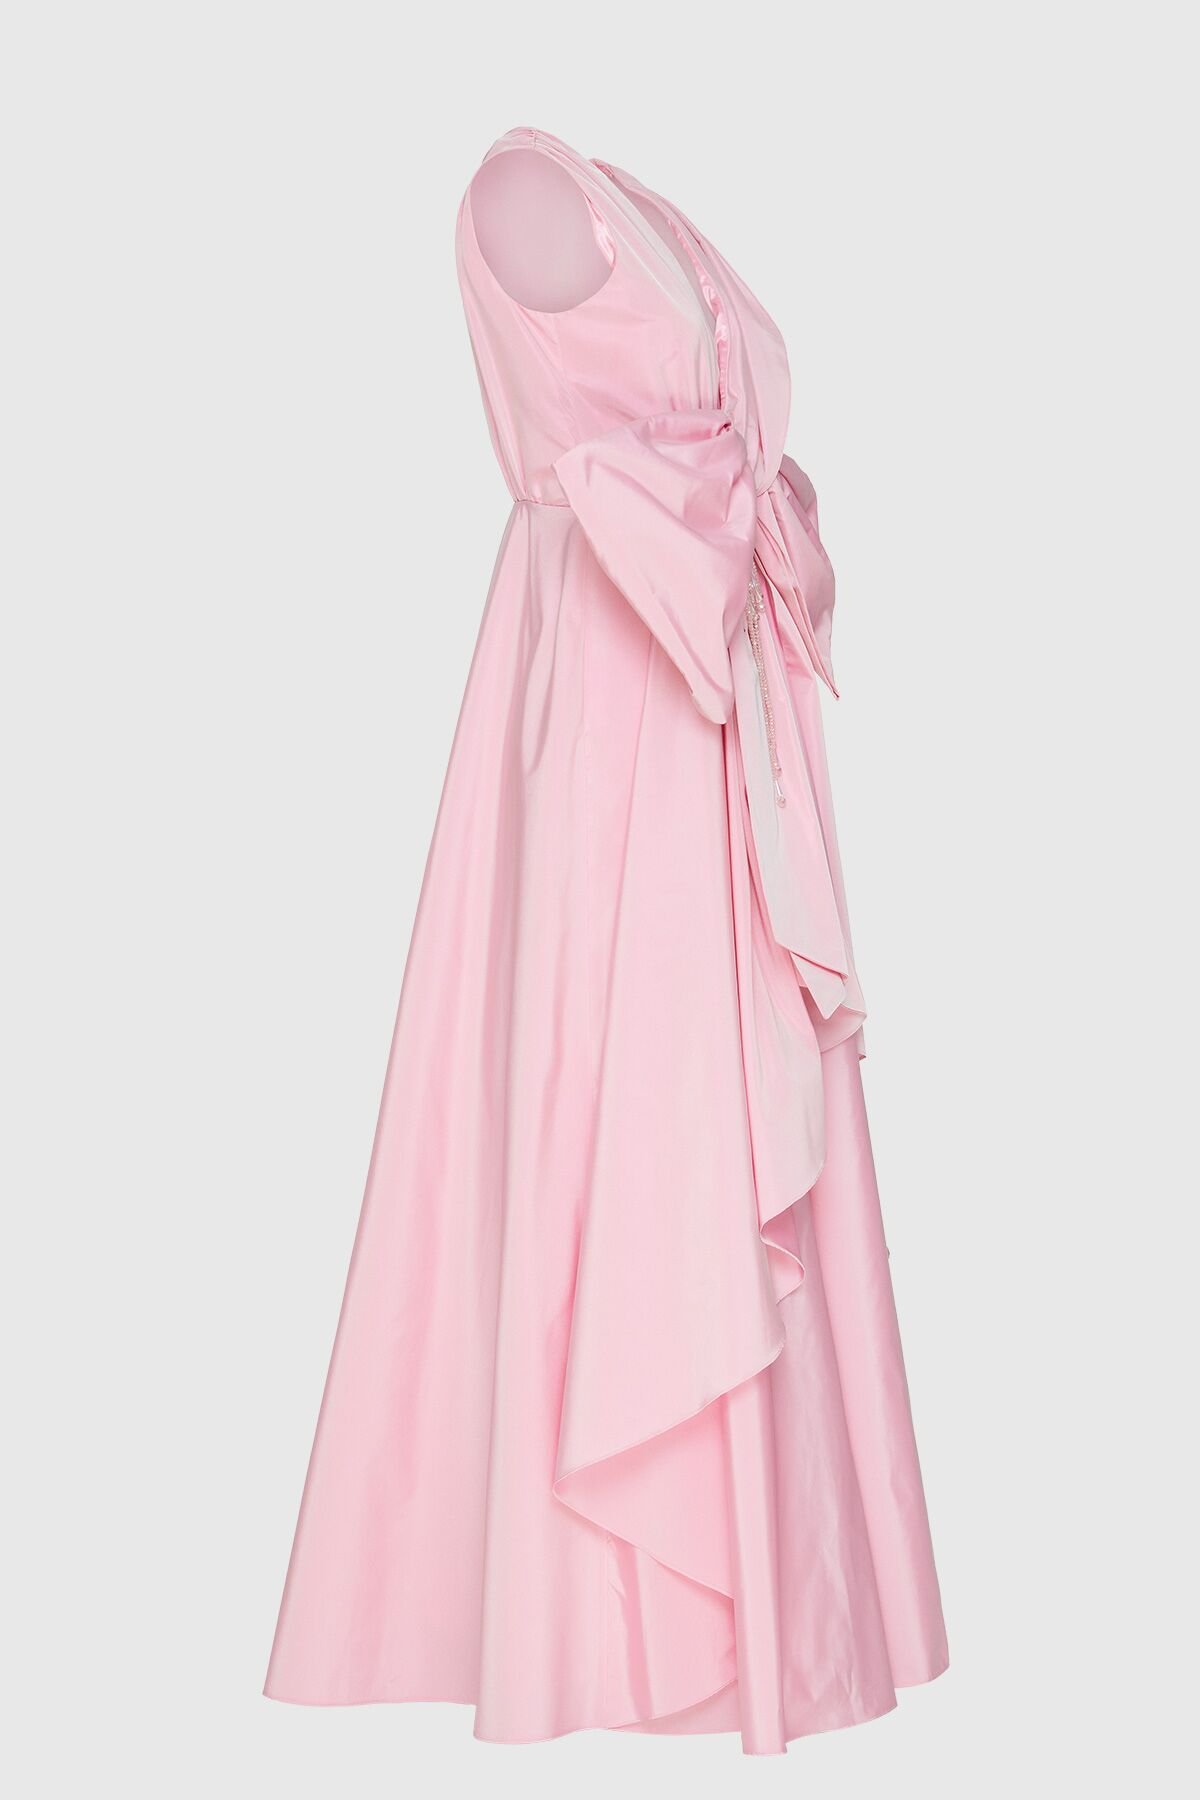 Long Pink Evening Dress with Front Bow and Embroidered Detail